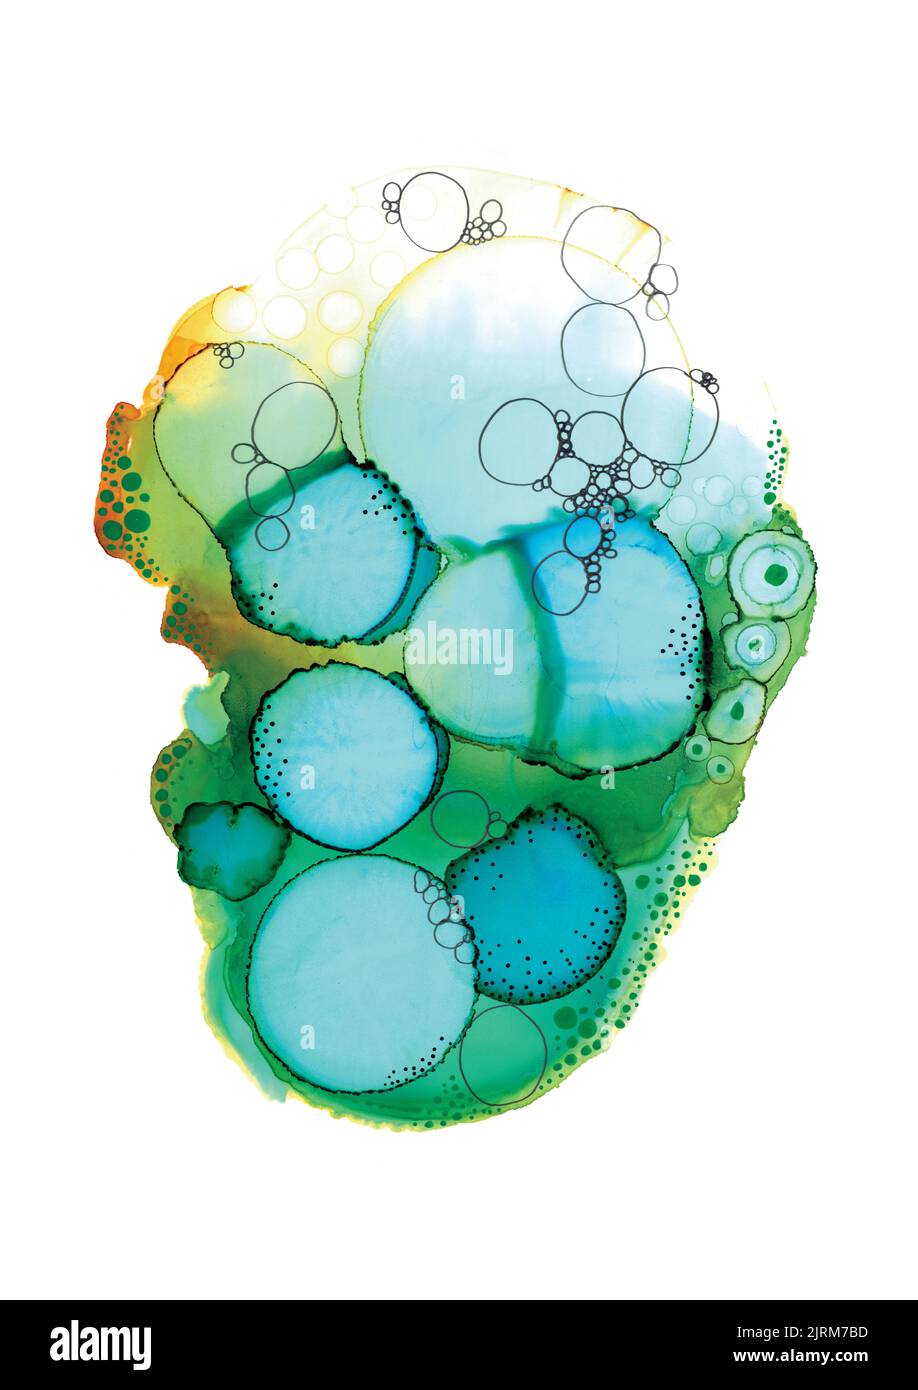 green and white art, bright field microscopy inspired, abstract watercolour and ink art specimens with a cellular plant moss lichen organic structure. Stock Photo